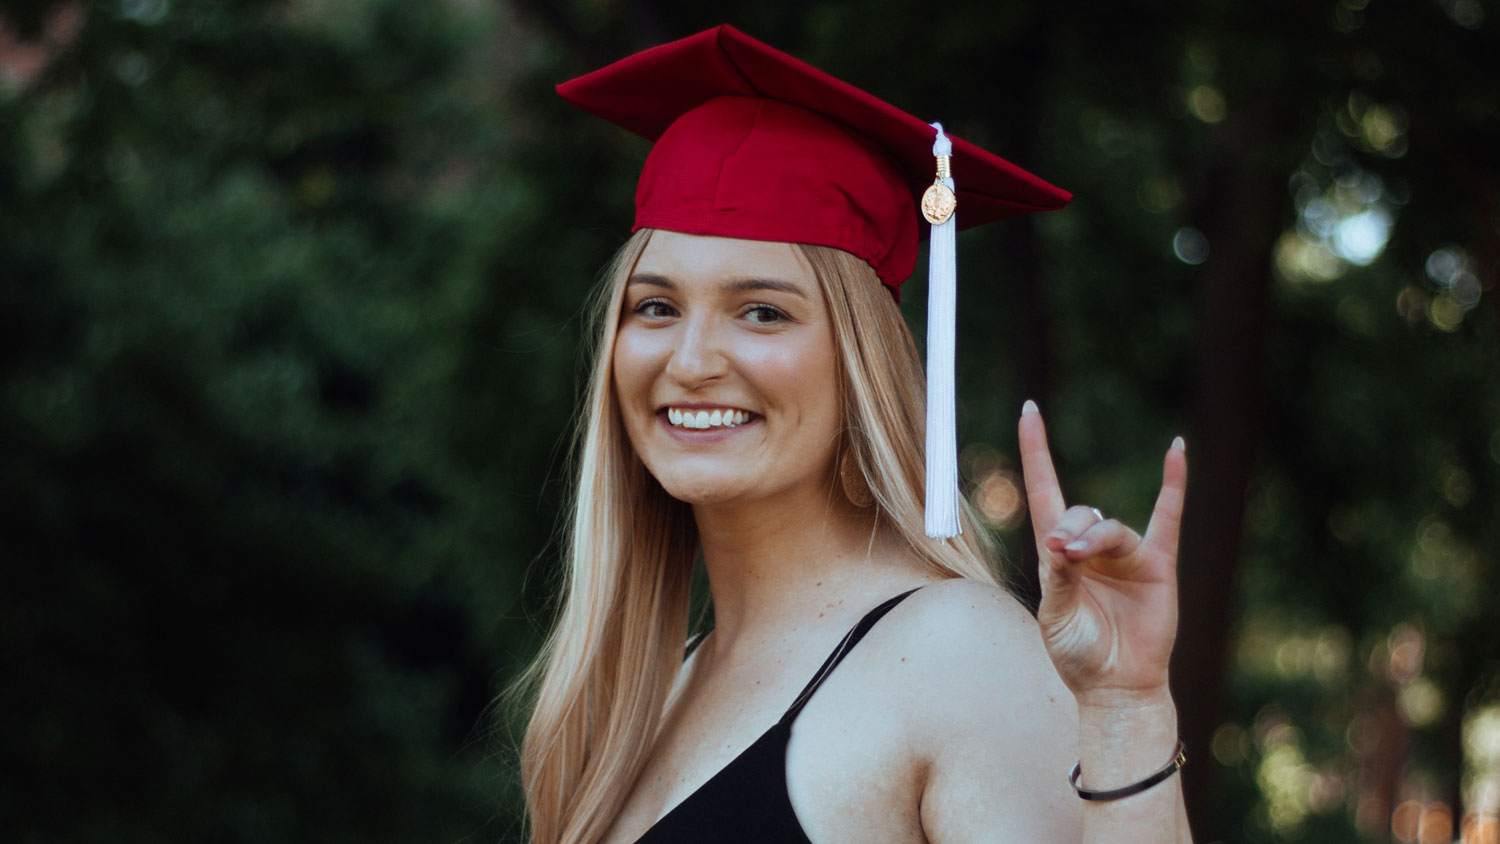 Alex Blanchard wearing her red graduation cap and holding up wolf ears.